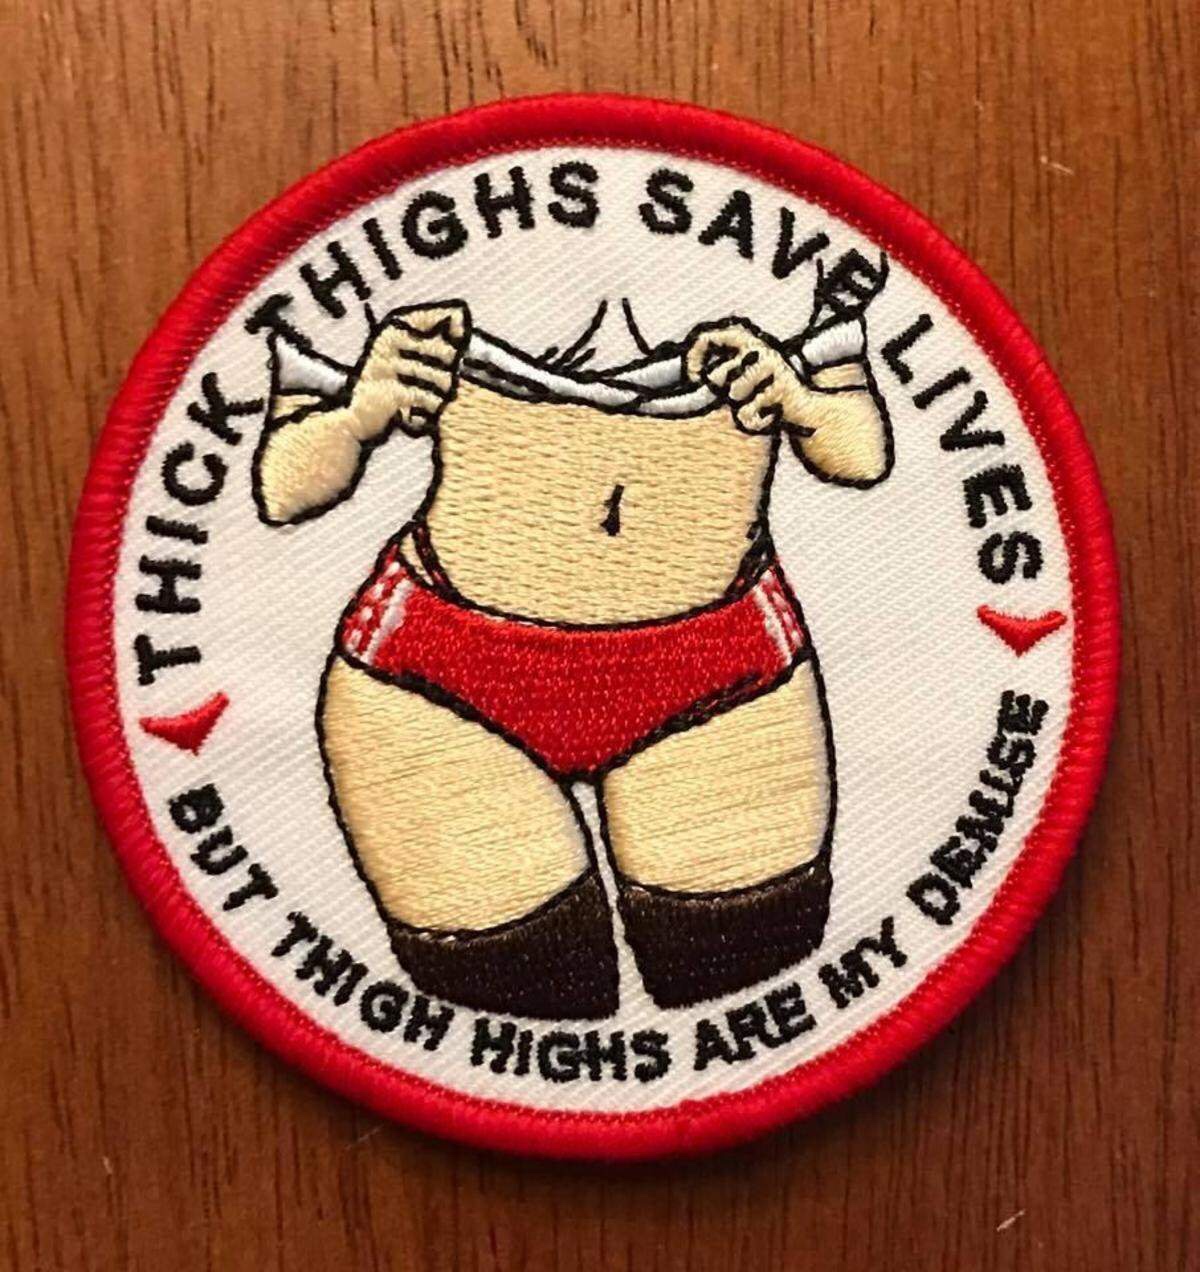 badge - Savo Ighs Thic Es > Ast 07 Thigh A Highs Are